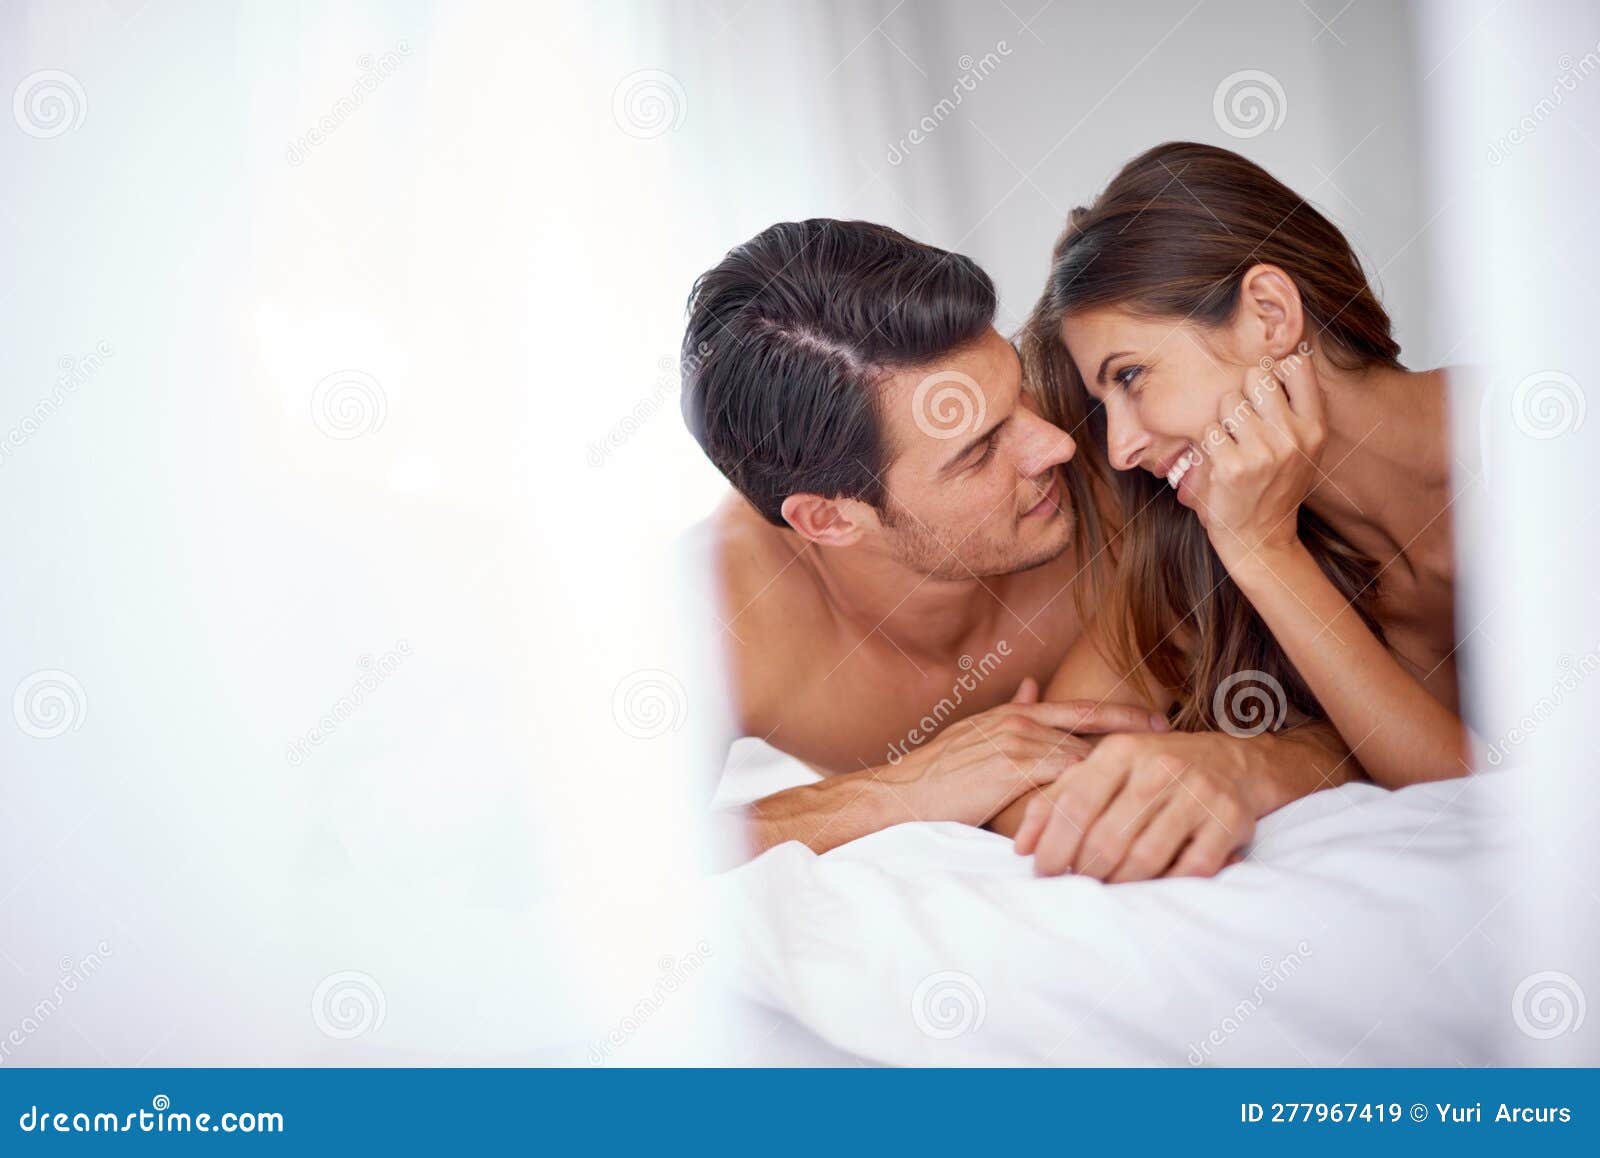 Intimate, Love and Couple in the Bedroom for Conversation, Relaxing and Honeymoon in a Hotel